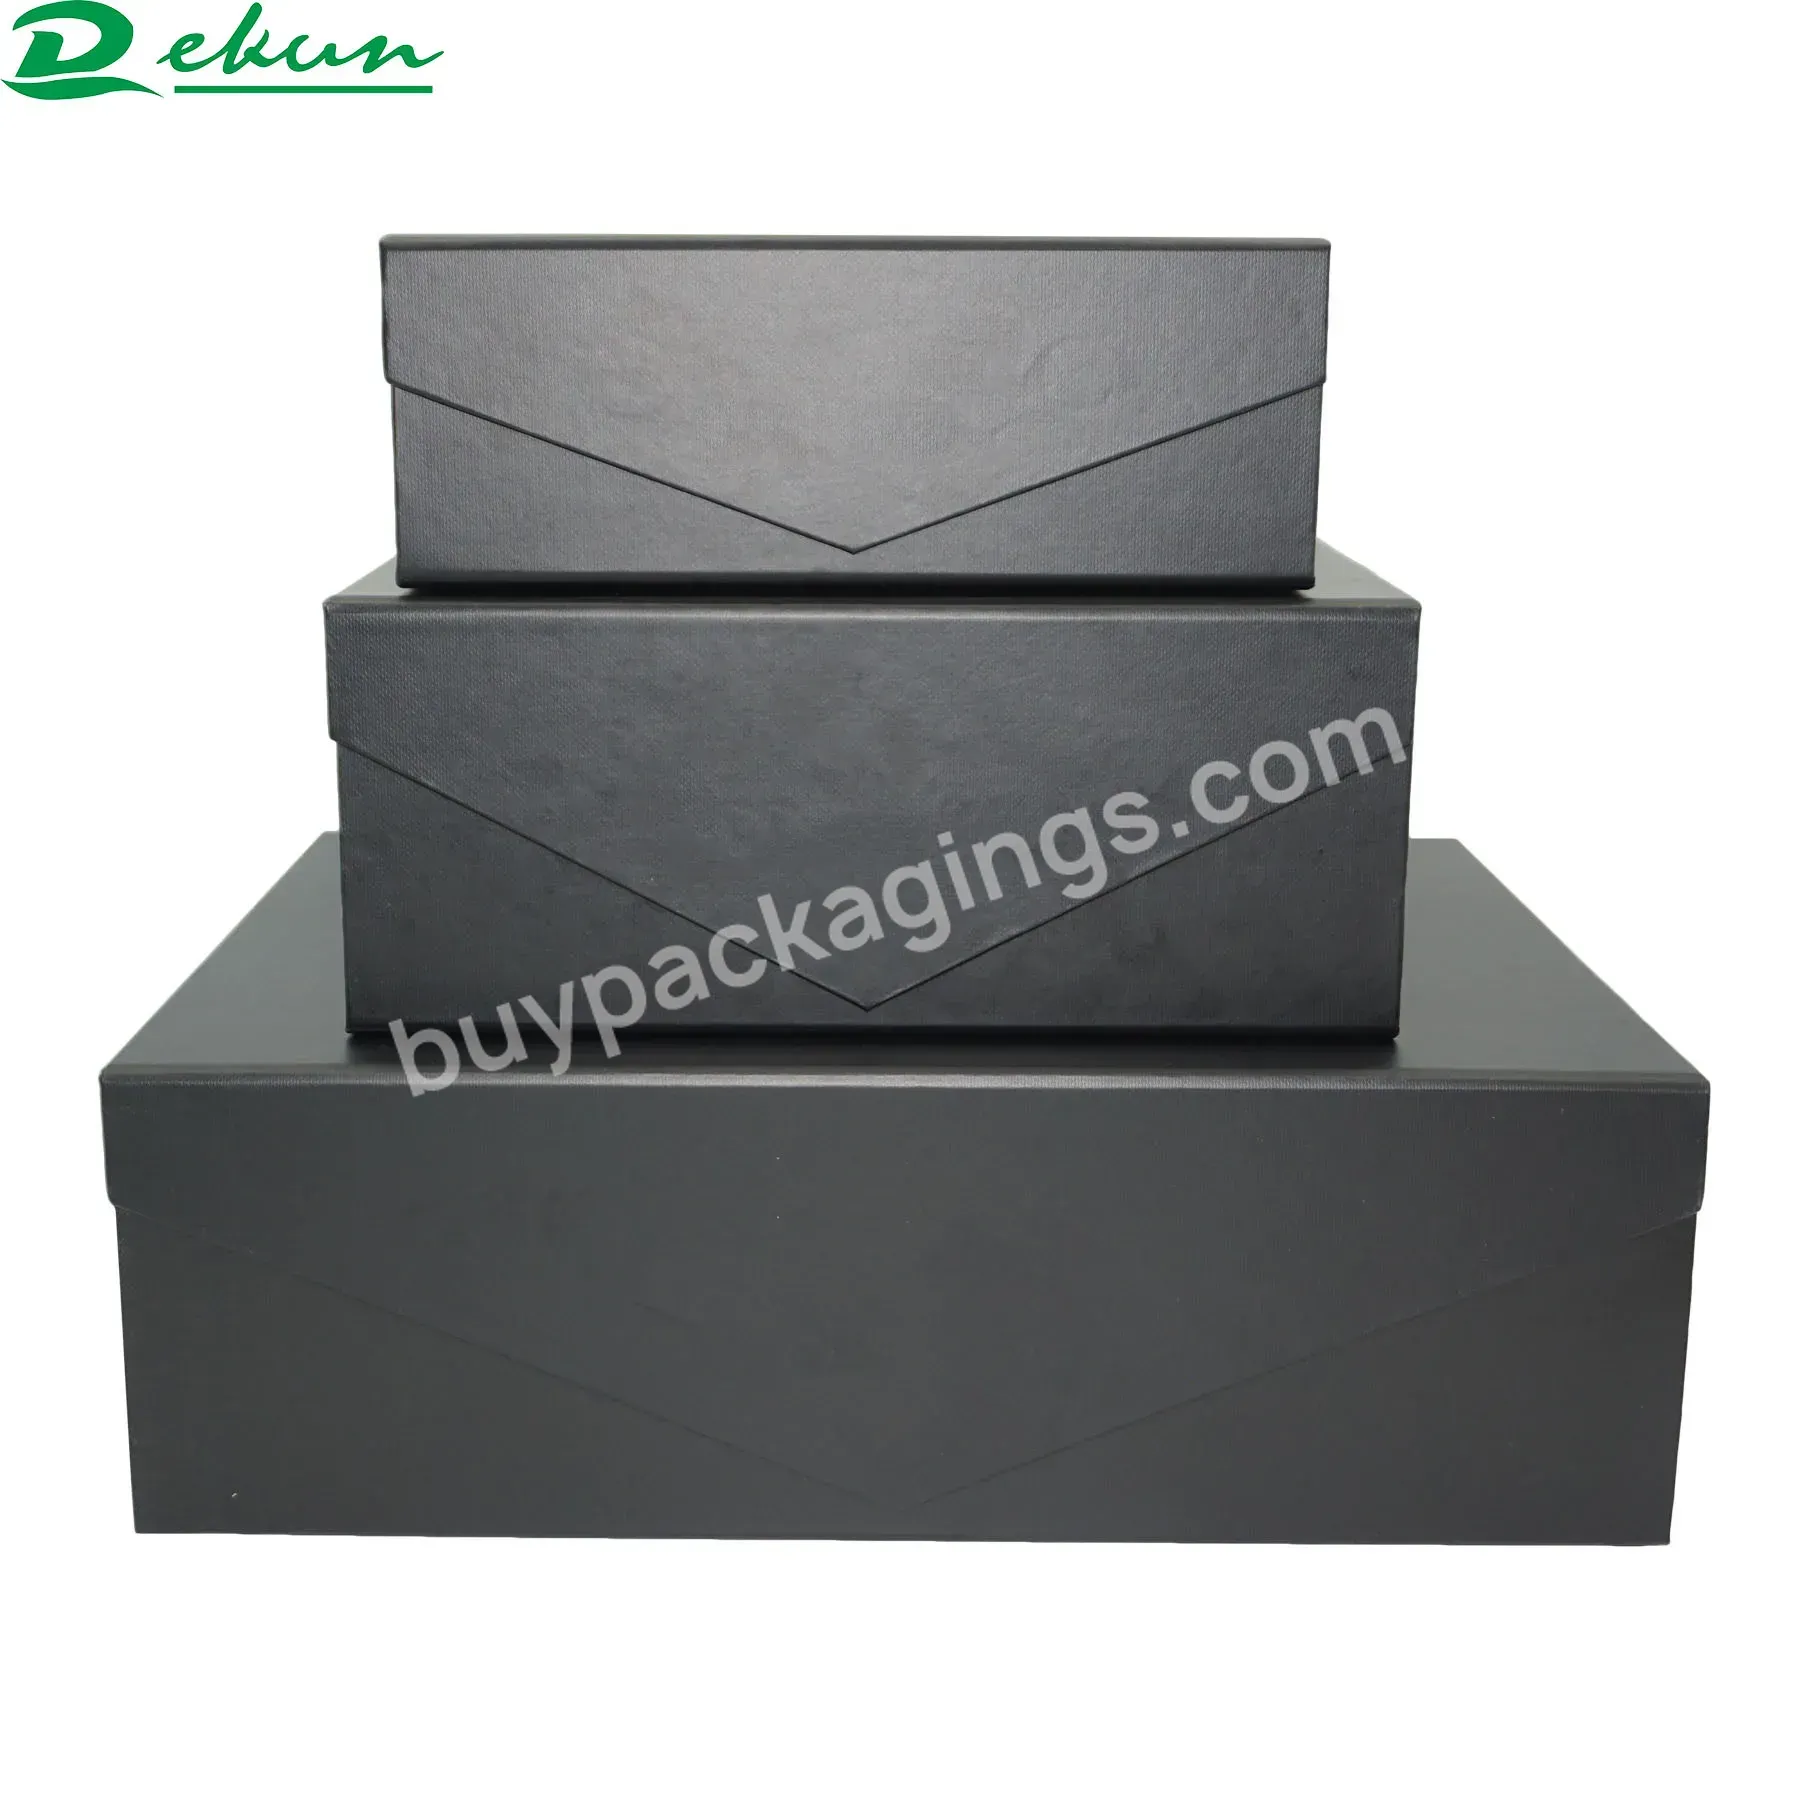 In Stock Rts Black White Gold Gift Box With Logo Luxury Promotion Price Folding Packaging Box Flat Pack With Magnetic Closure